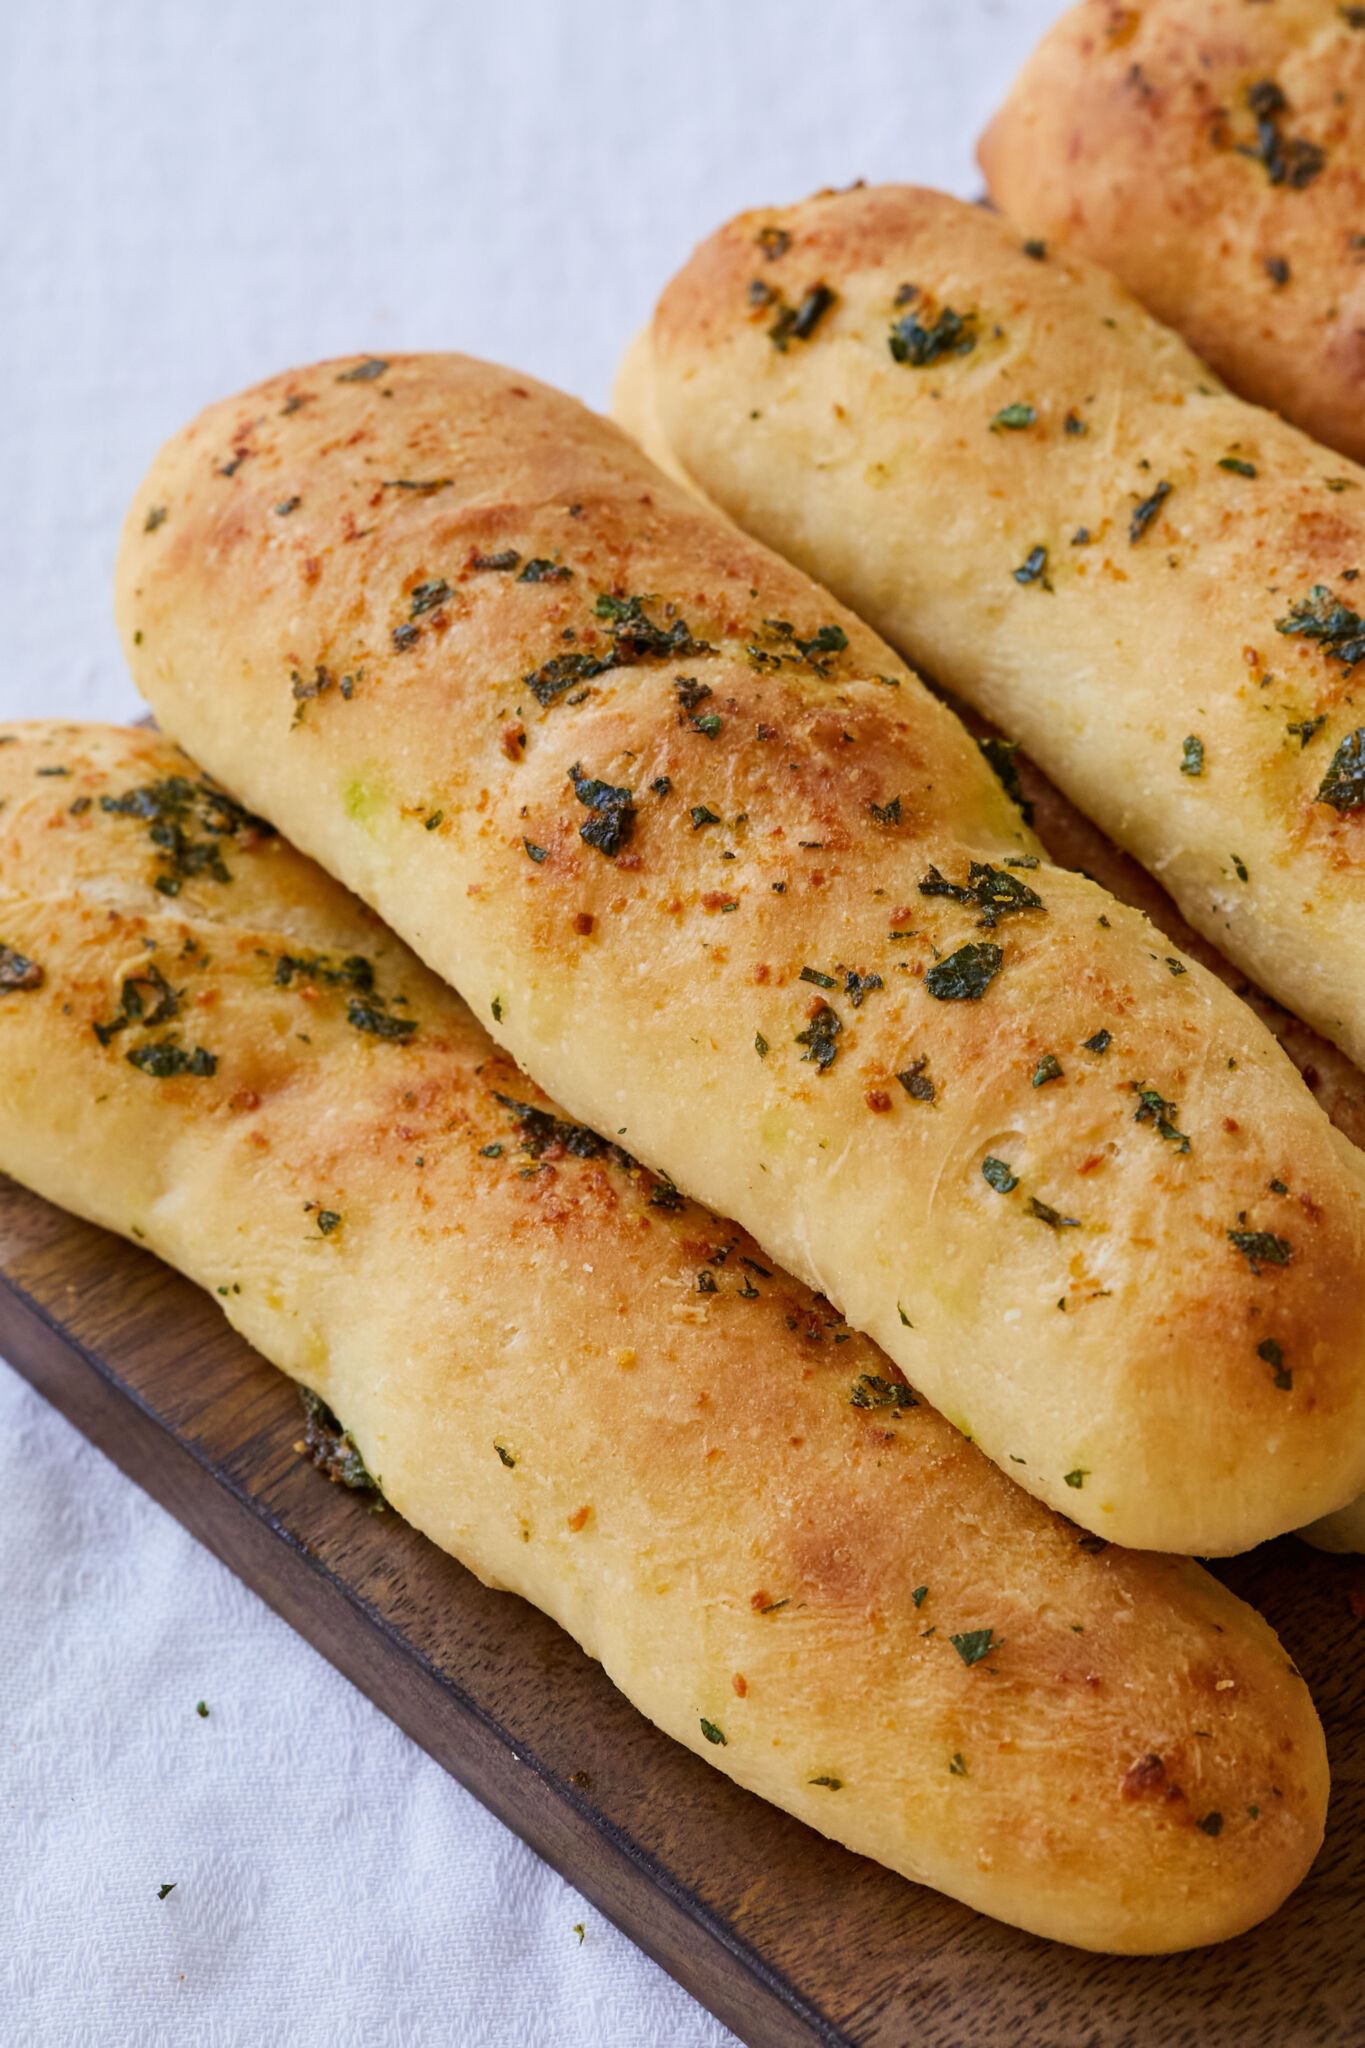 Garlic Breadsticks are shaped into long, thin rods and were baked until golden brown. The exterior looks slightly crispy with brushed butter, garlic and herbs. 